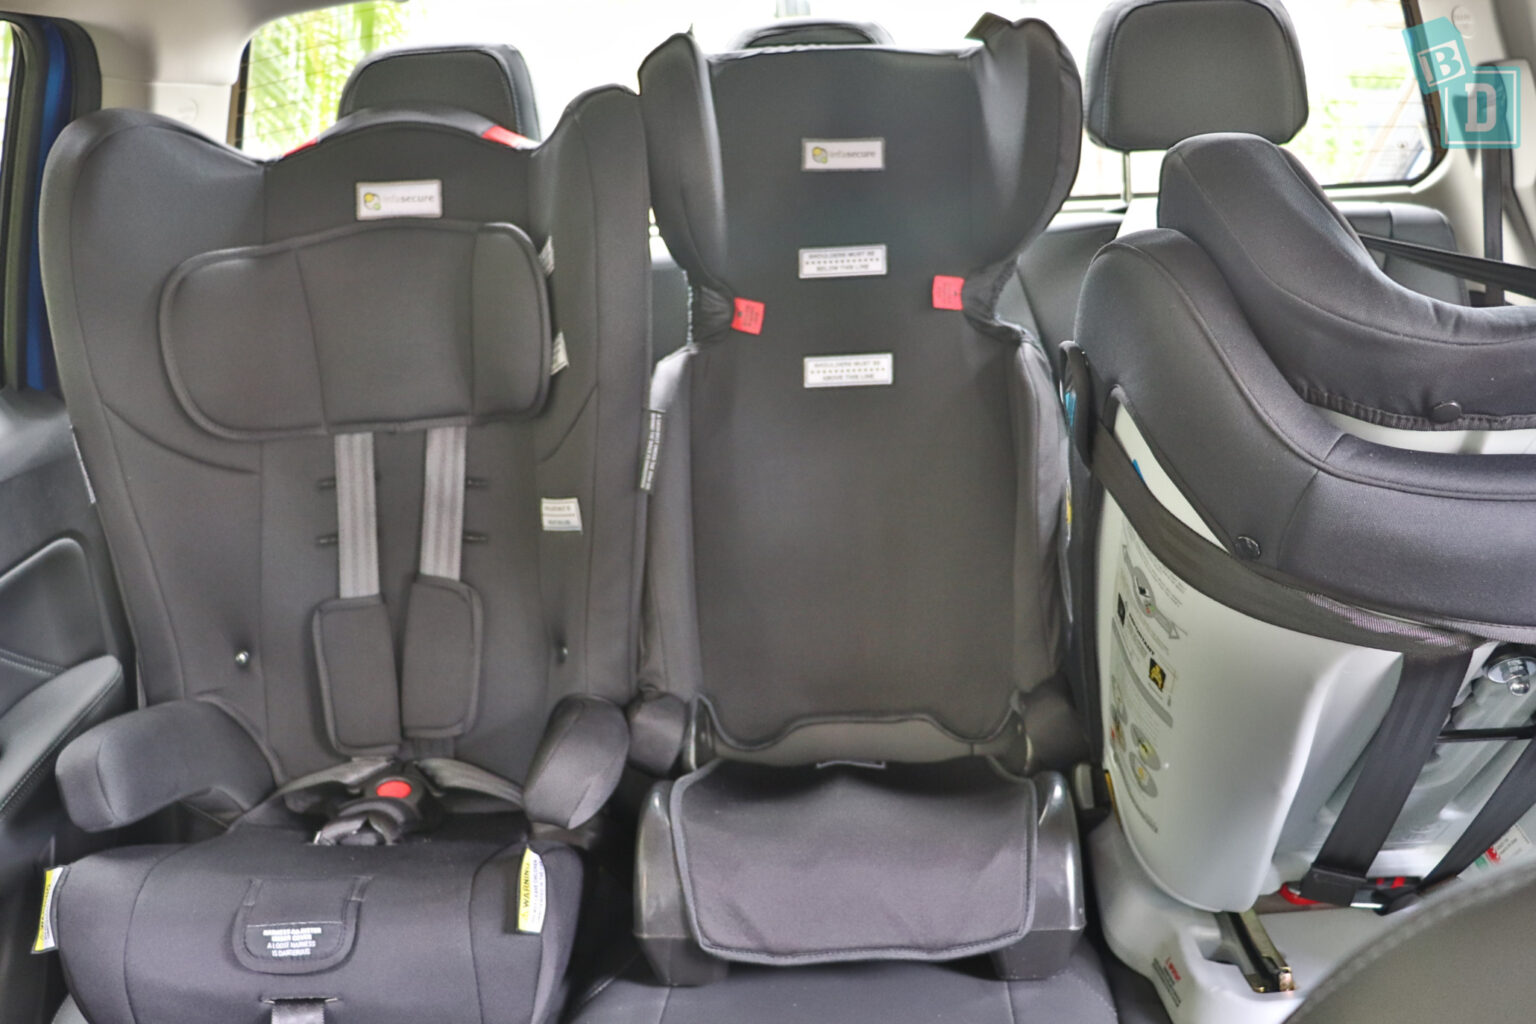 2021 GWM Cannon-L Ute 4x4 family car review – BabyDrive